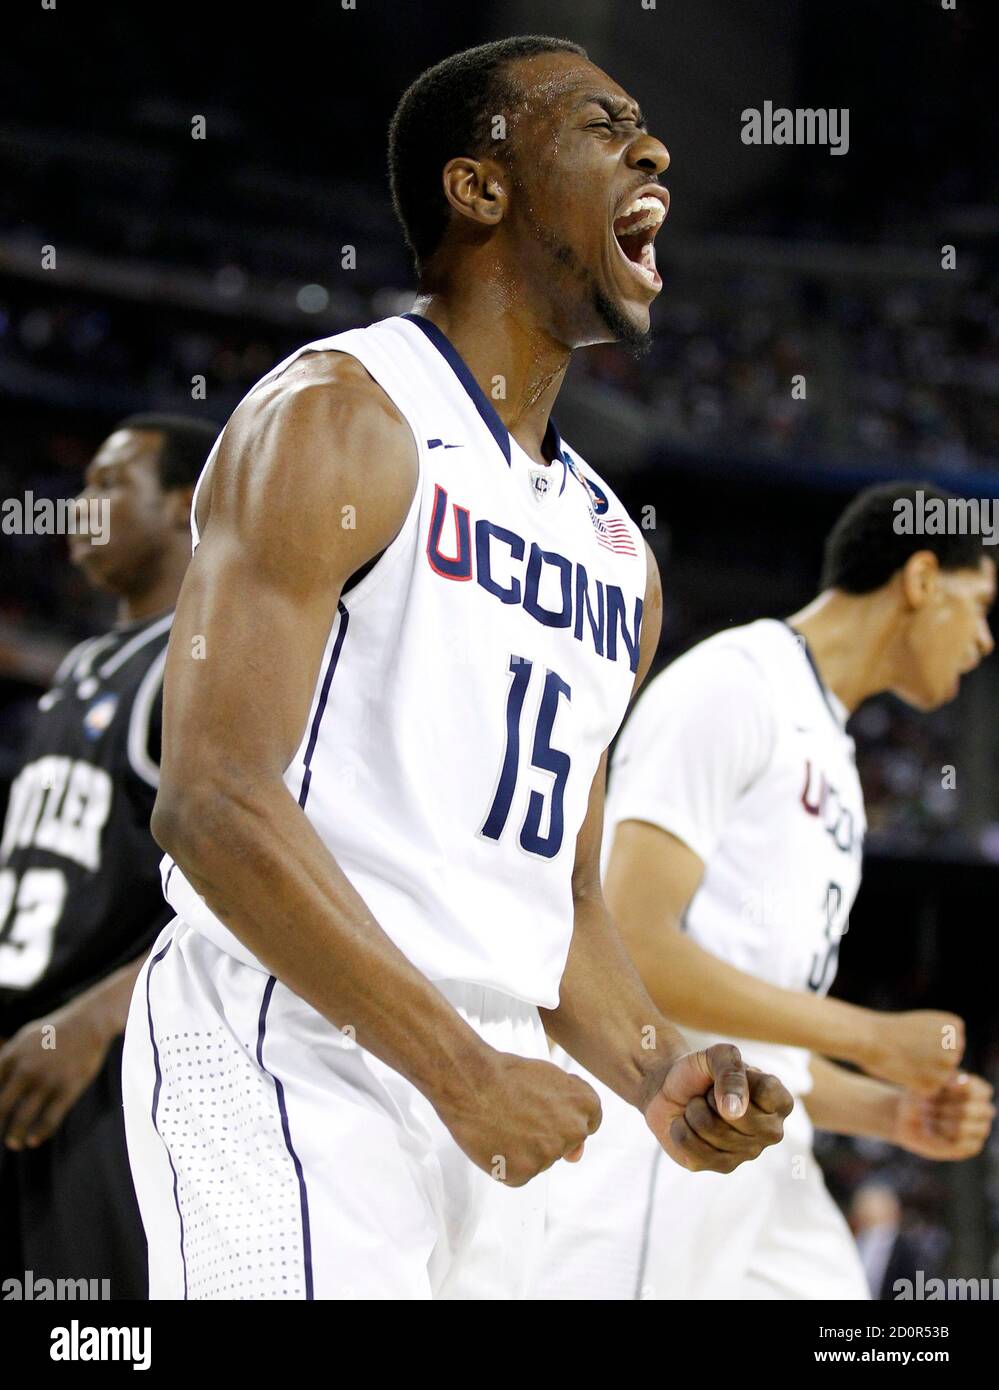 Connecticut Huskies Guard Kemba Walker Celebrates A Basket Against The Butler Bulldogs During Their Men S Final Ncaa Final Four College Basketball Game In Houston Texas April 4 2011 Reuters Lucy Nicholson United States